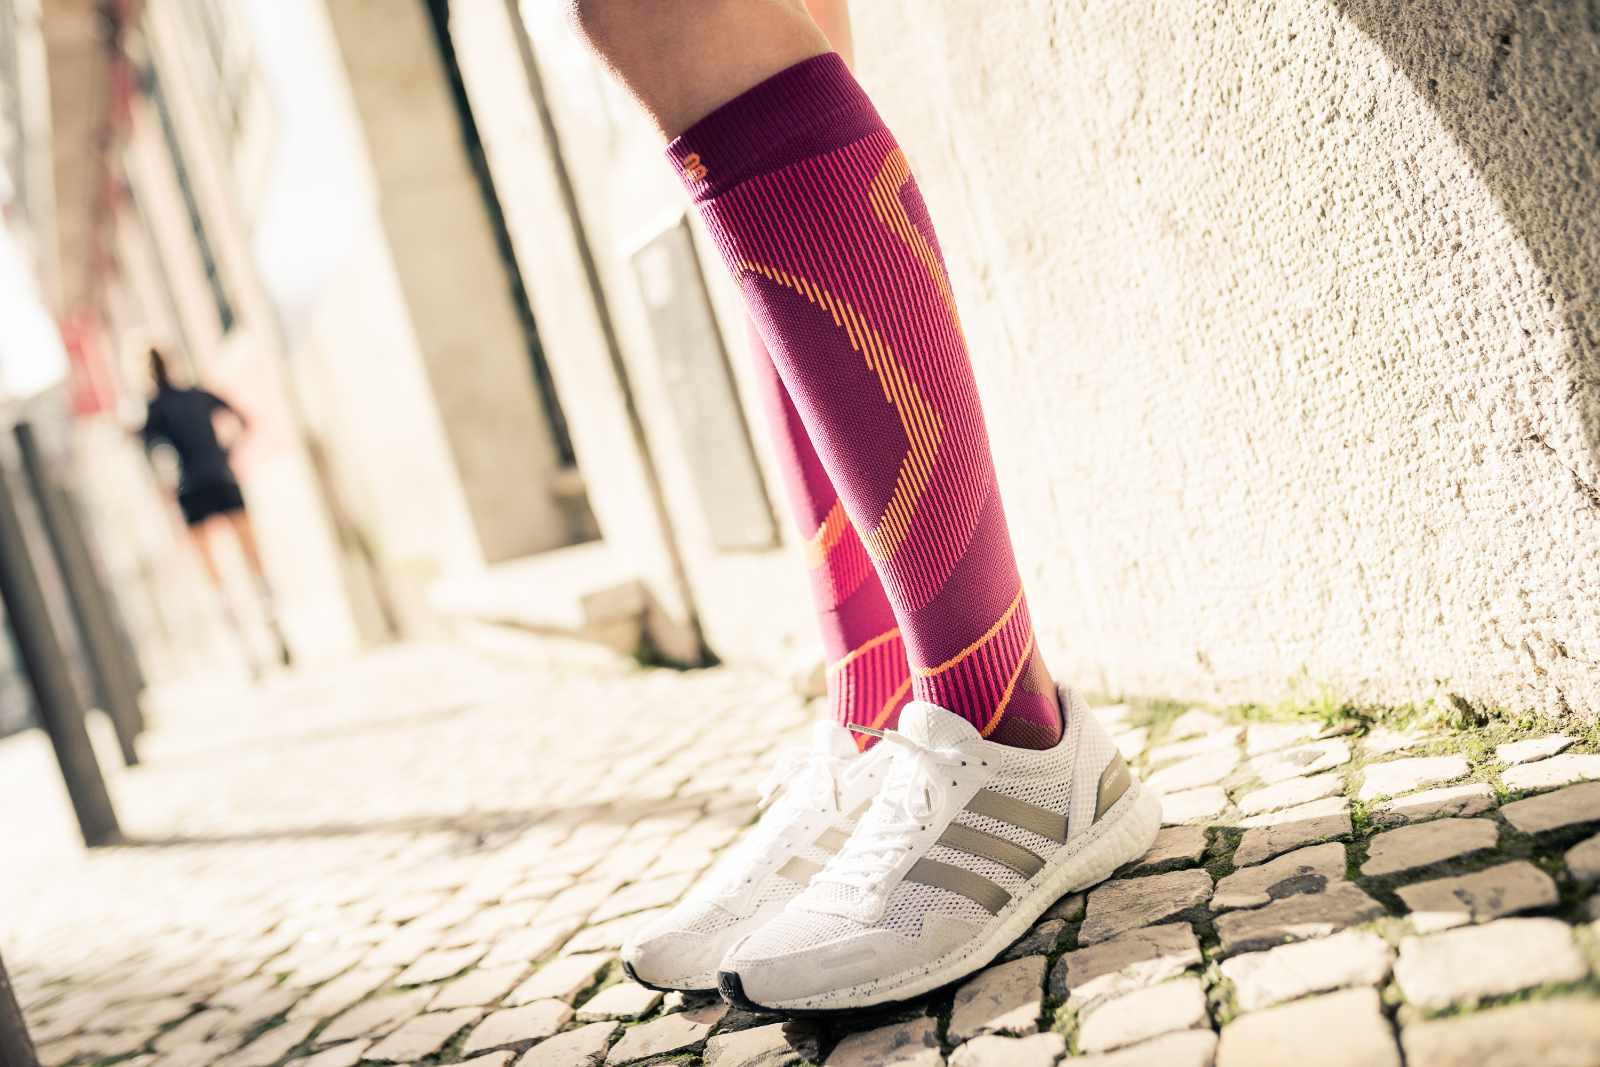 Close up of colorful running socks on the body in an urban environment